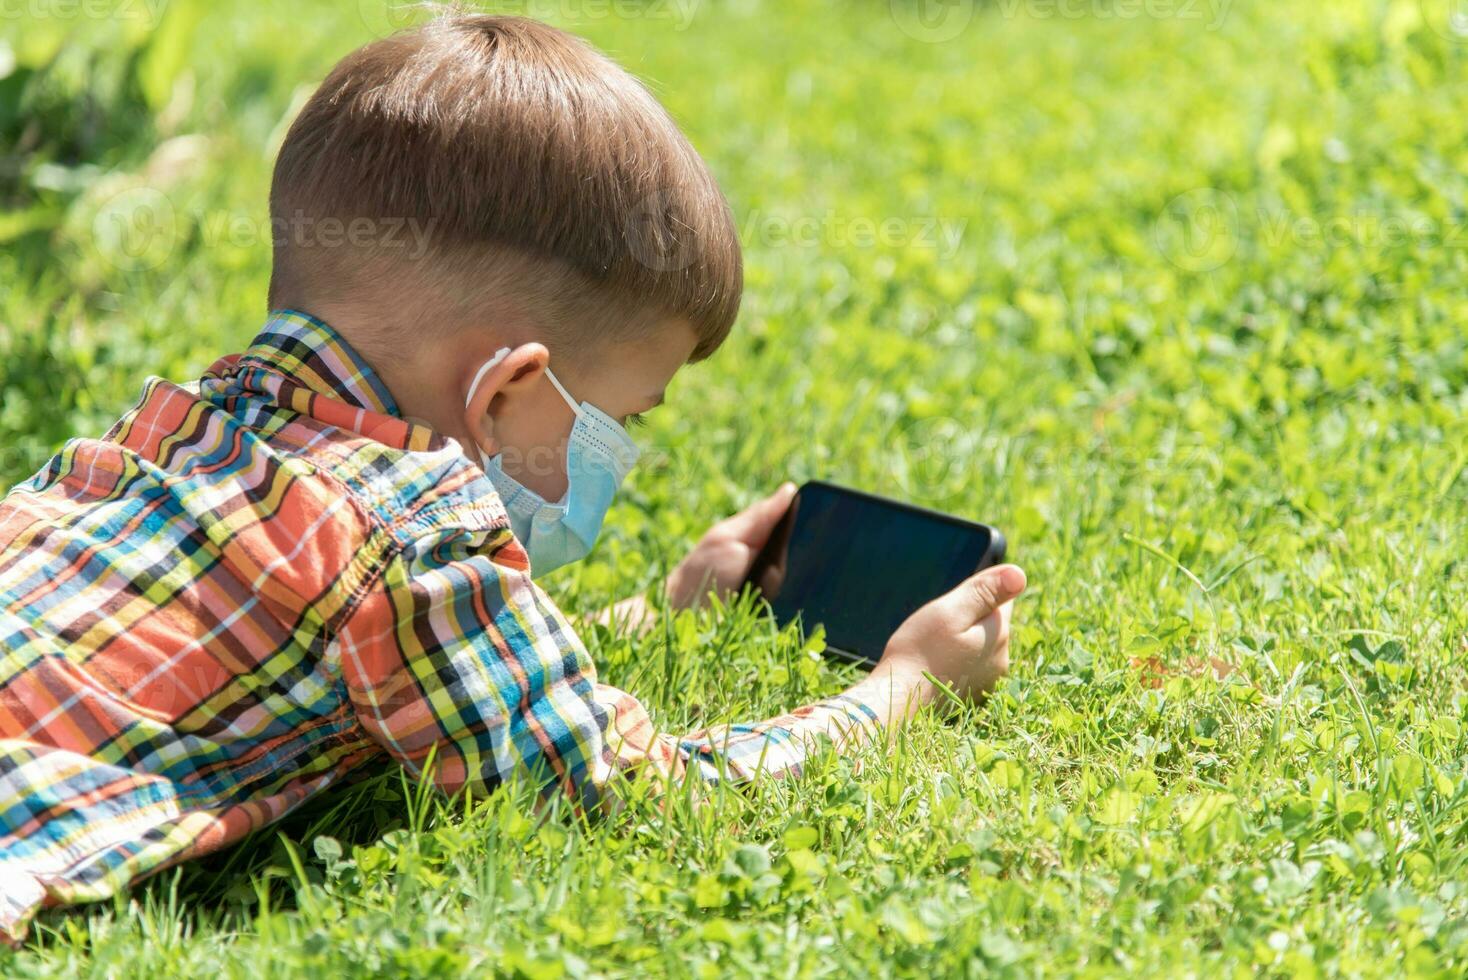 A child in a medical mask lies on the grass and looks in the phone cartoons in the summer at sunset. Kid with a mobile phone in his hands. Prevention against coronavirus Covid-19 during a pandemic photo